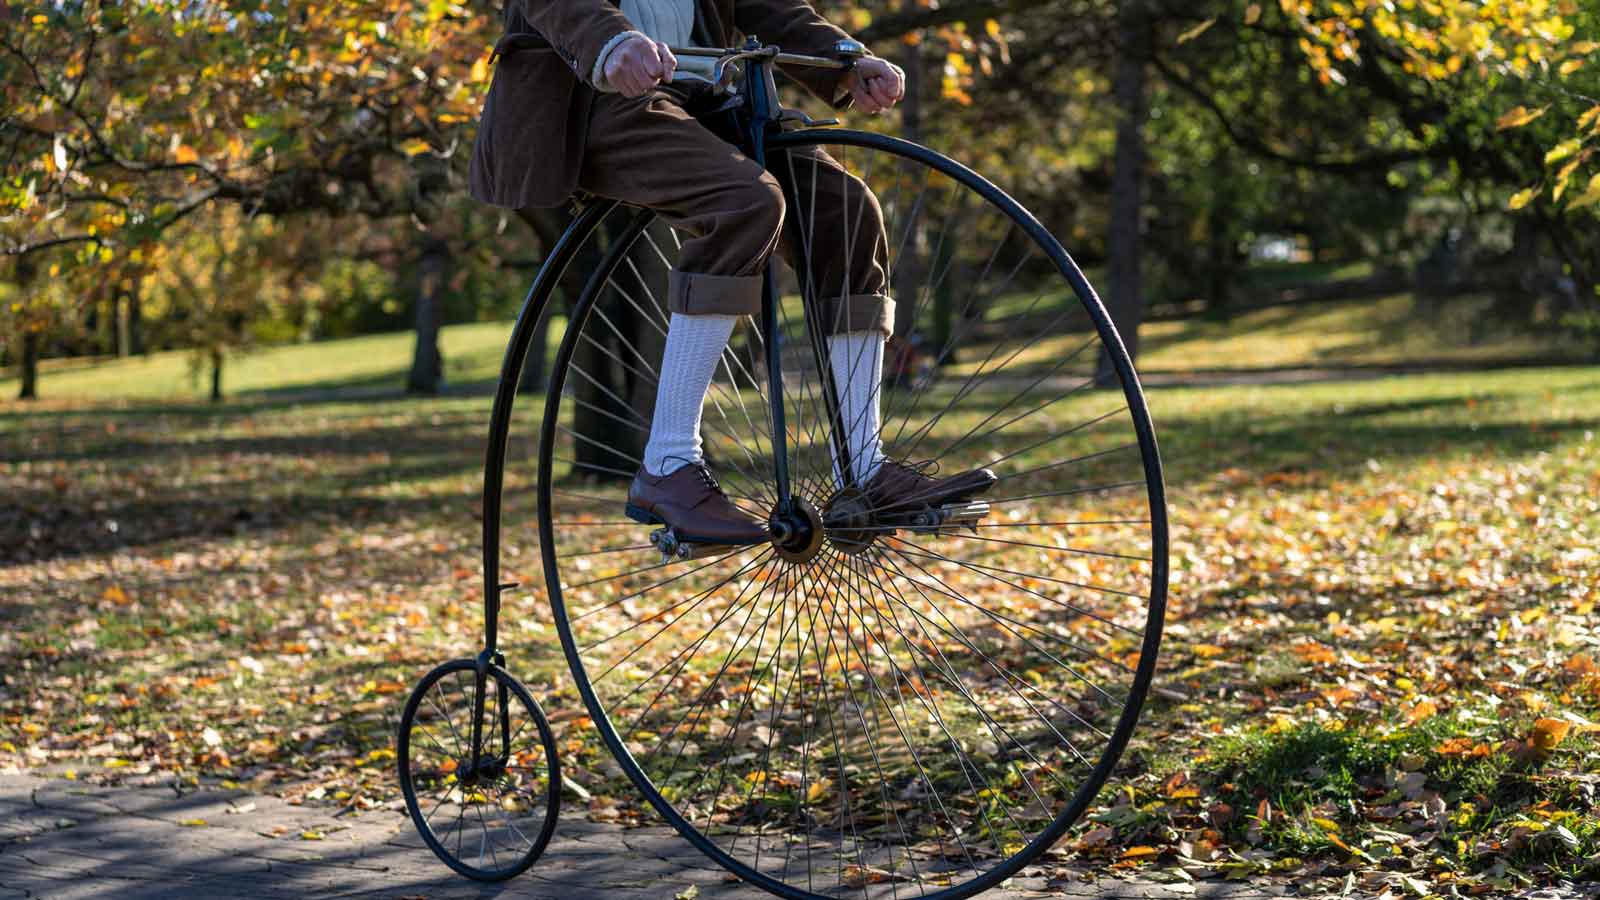 Penny farthing bicycle rider